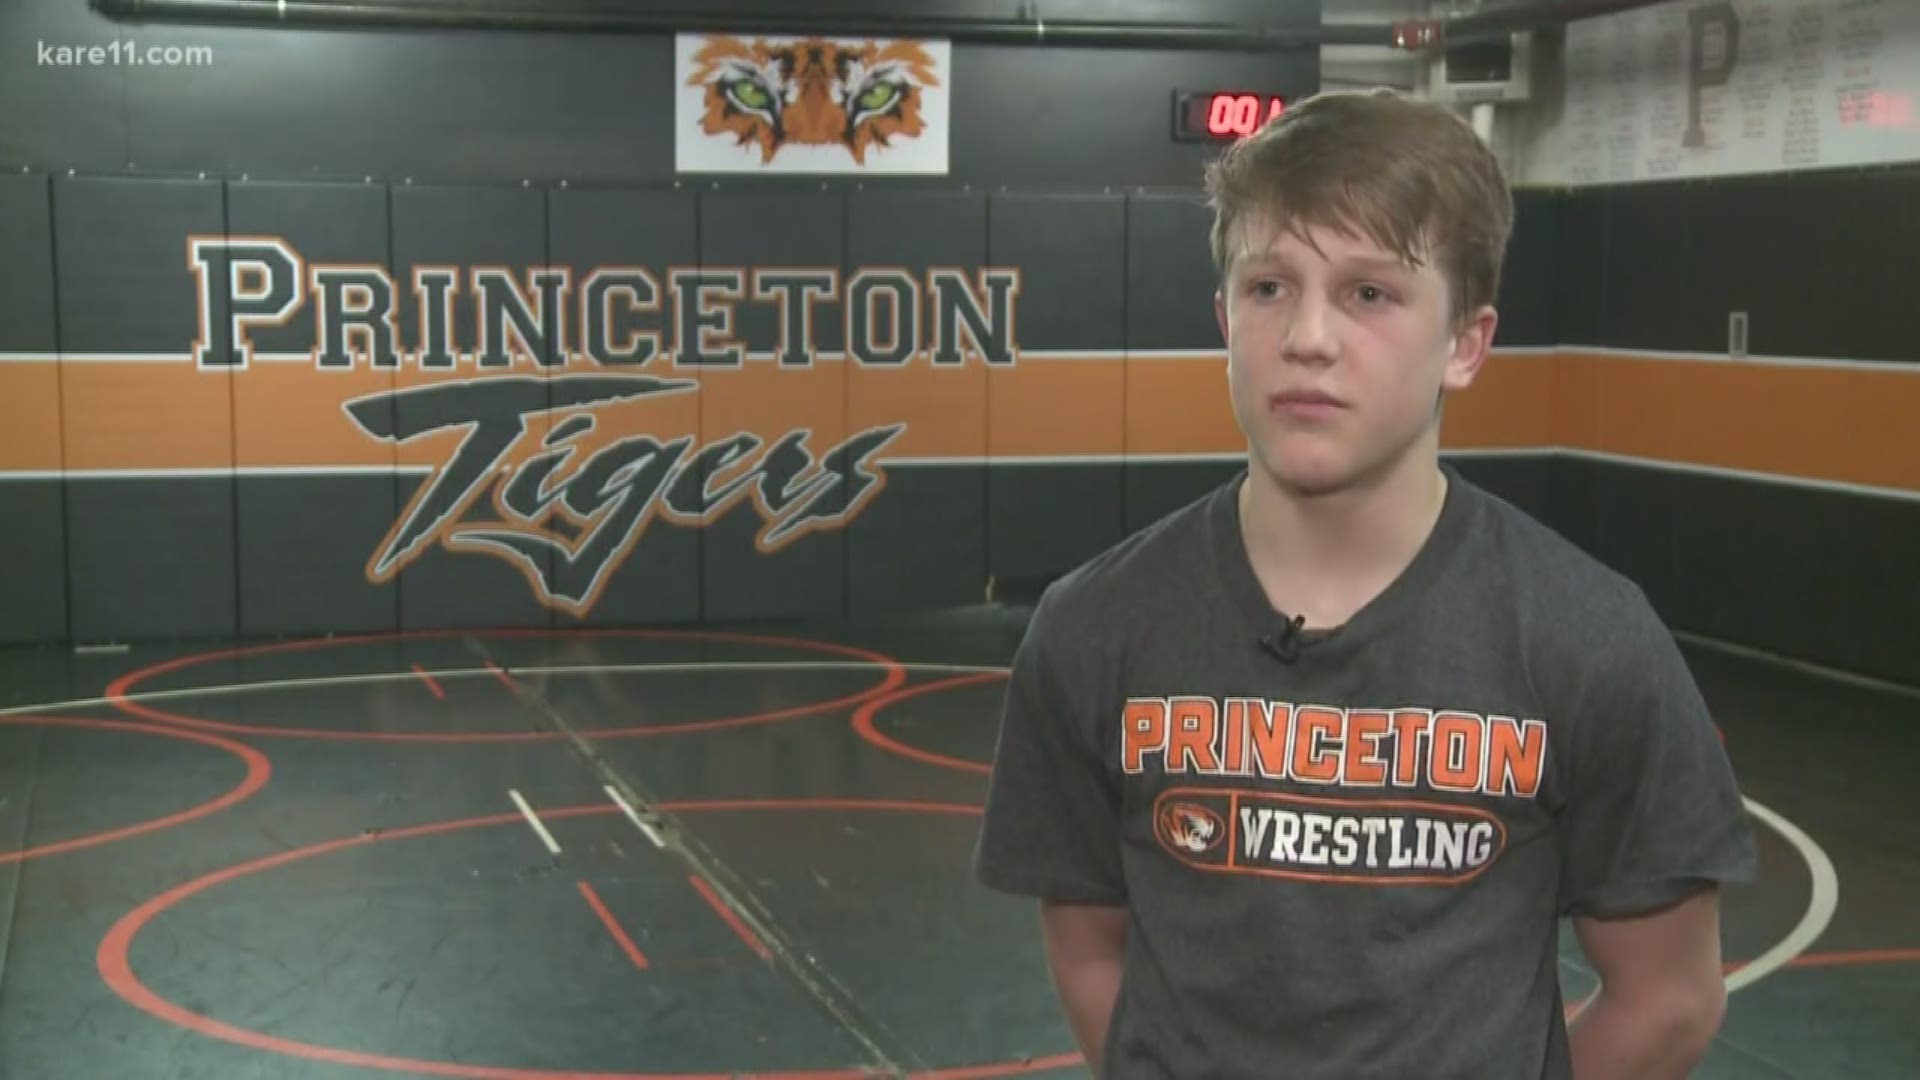 Princeton's Tyler Wells is only a freshman but he already has a state title and gold medal.